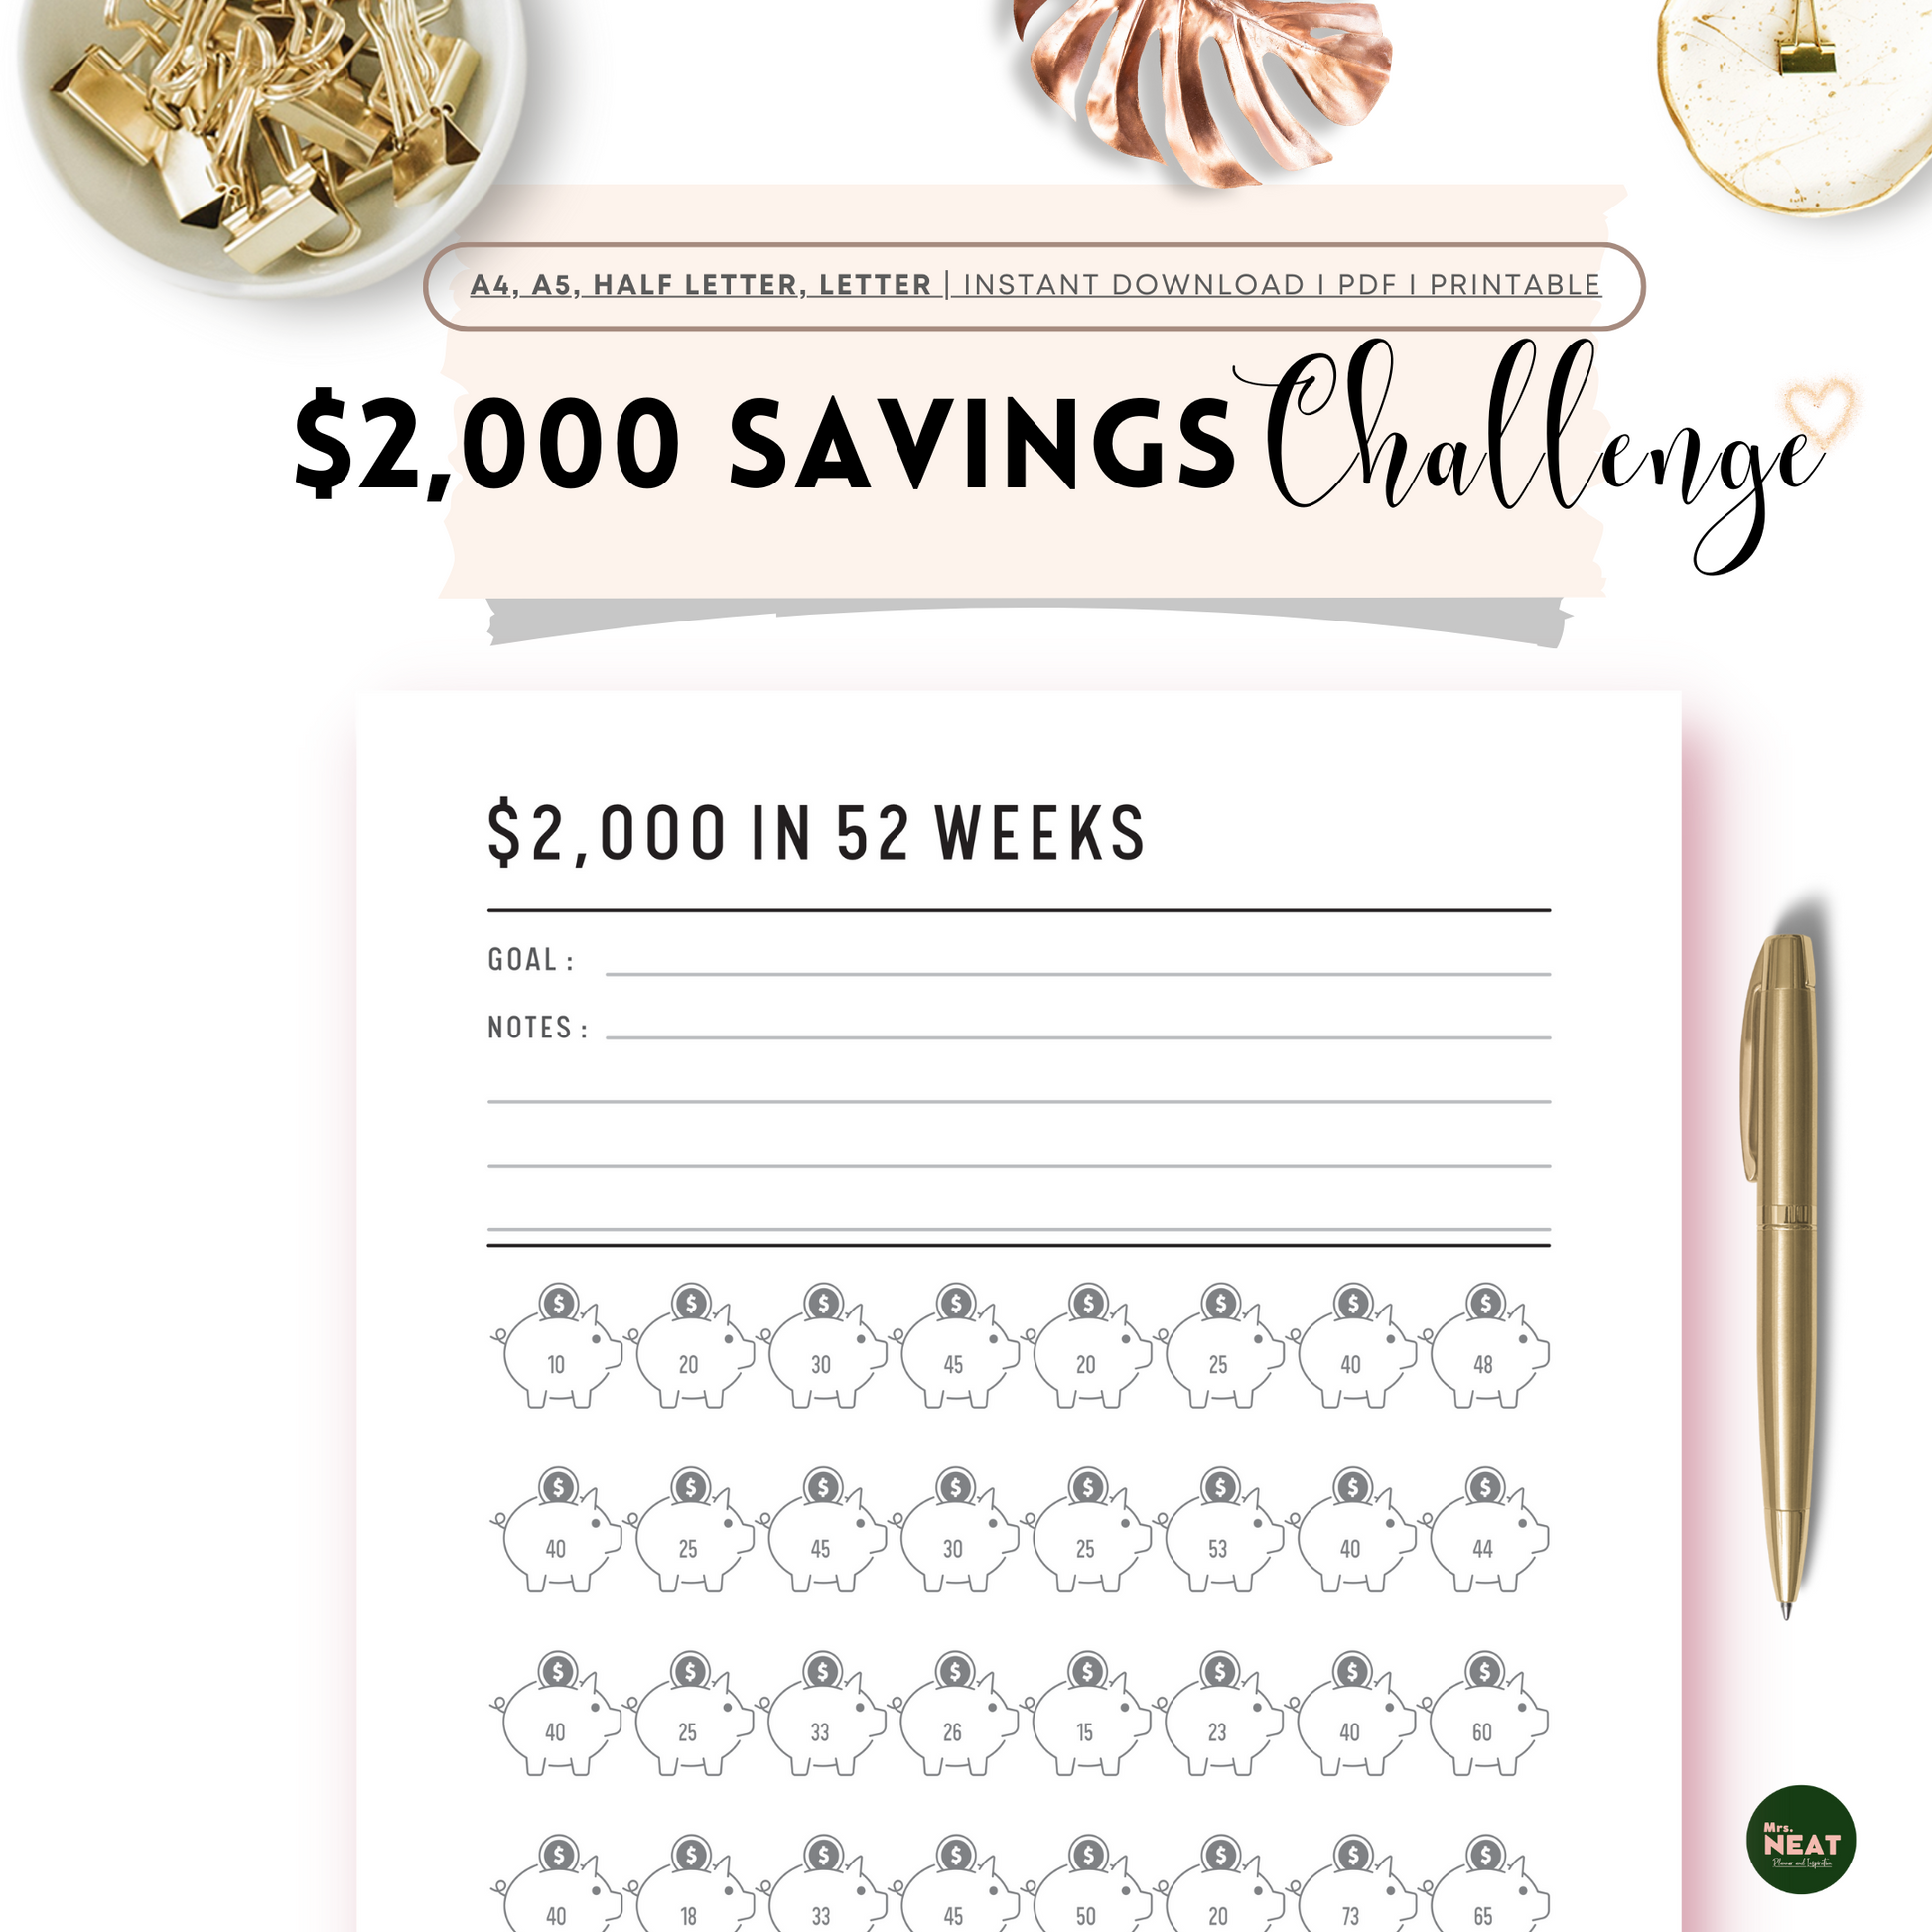 7 money hacks to save $2,000 a year